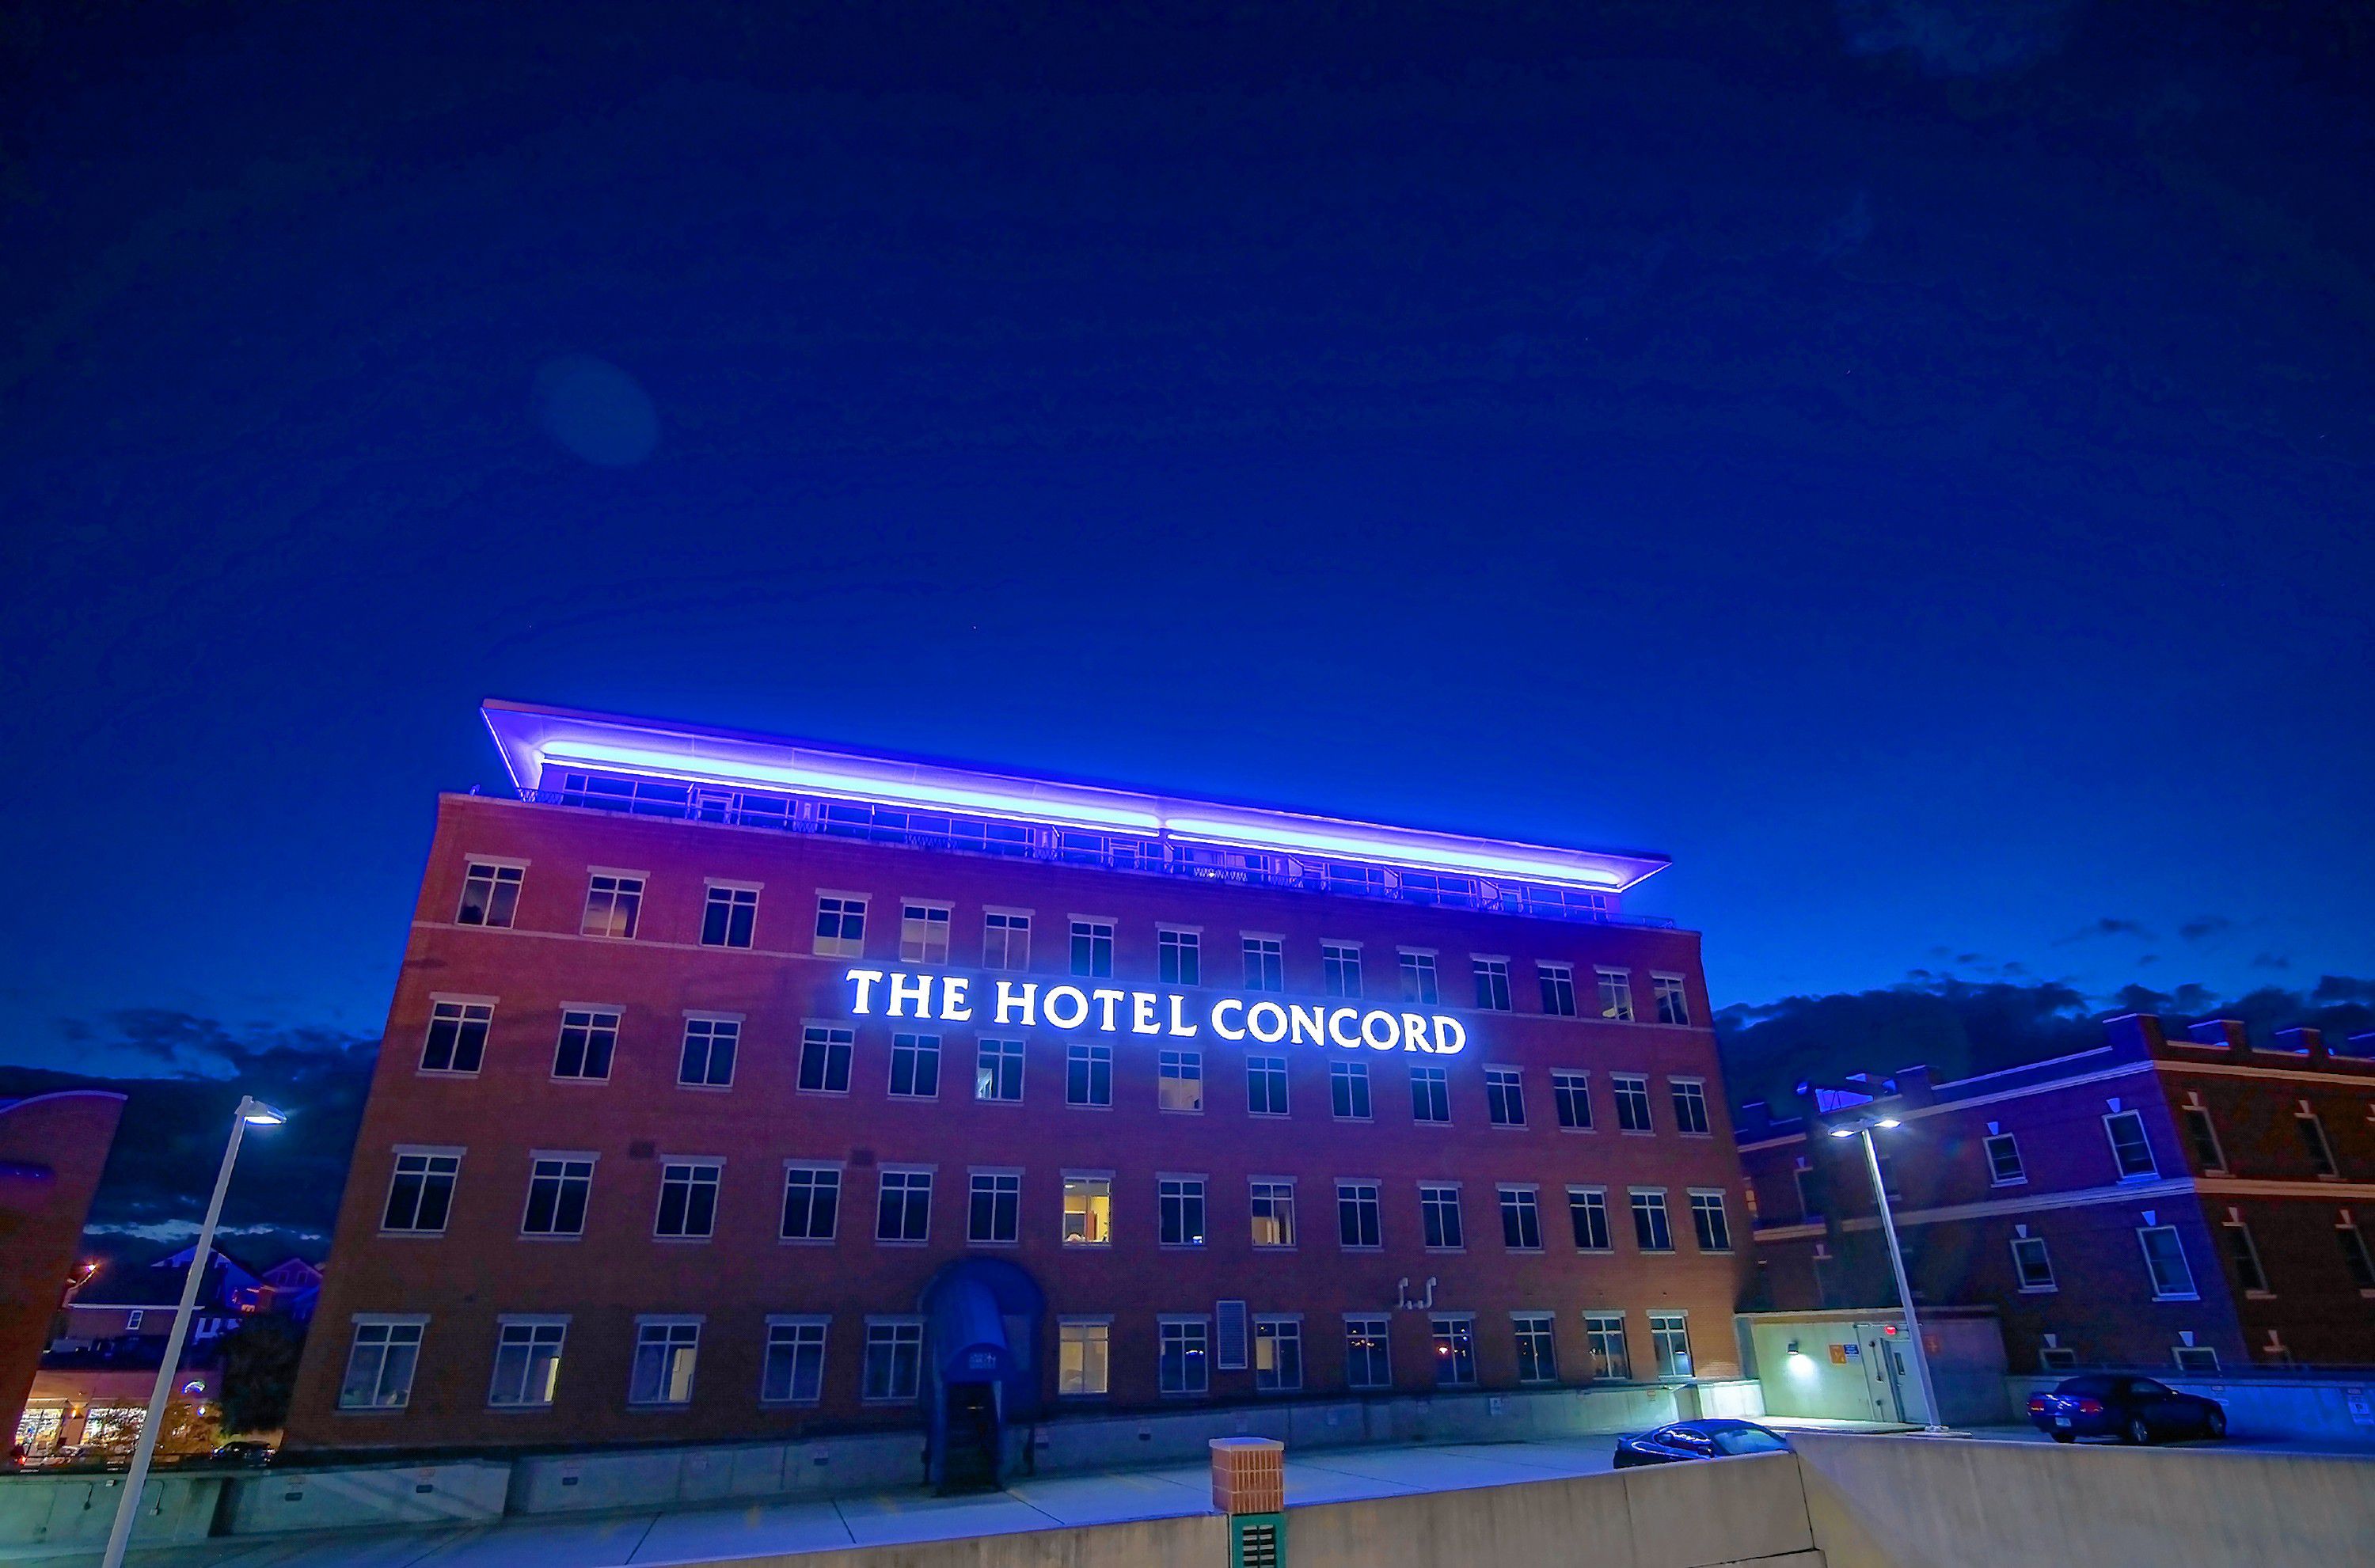 The Hotel Concord with its blue lights on after sunset on Thursday, September 12, 2019. GEOFF FORESTER